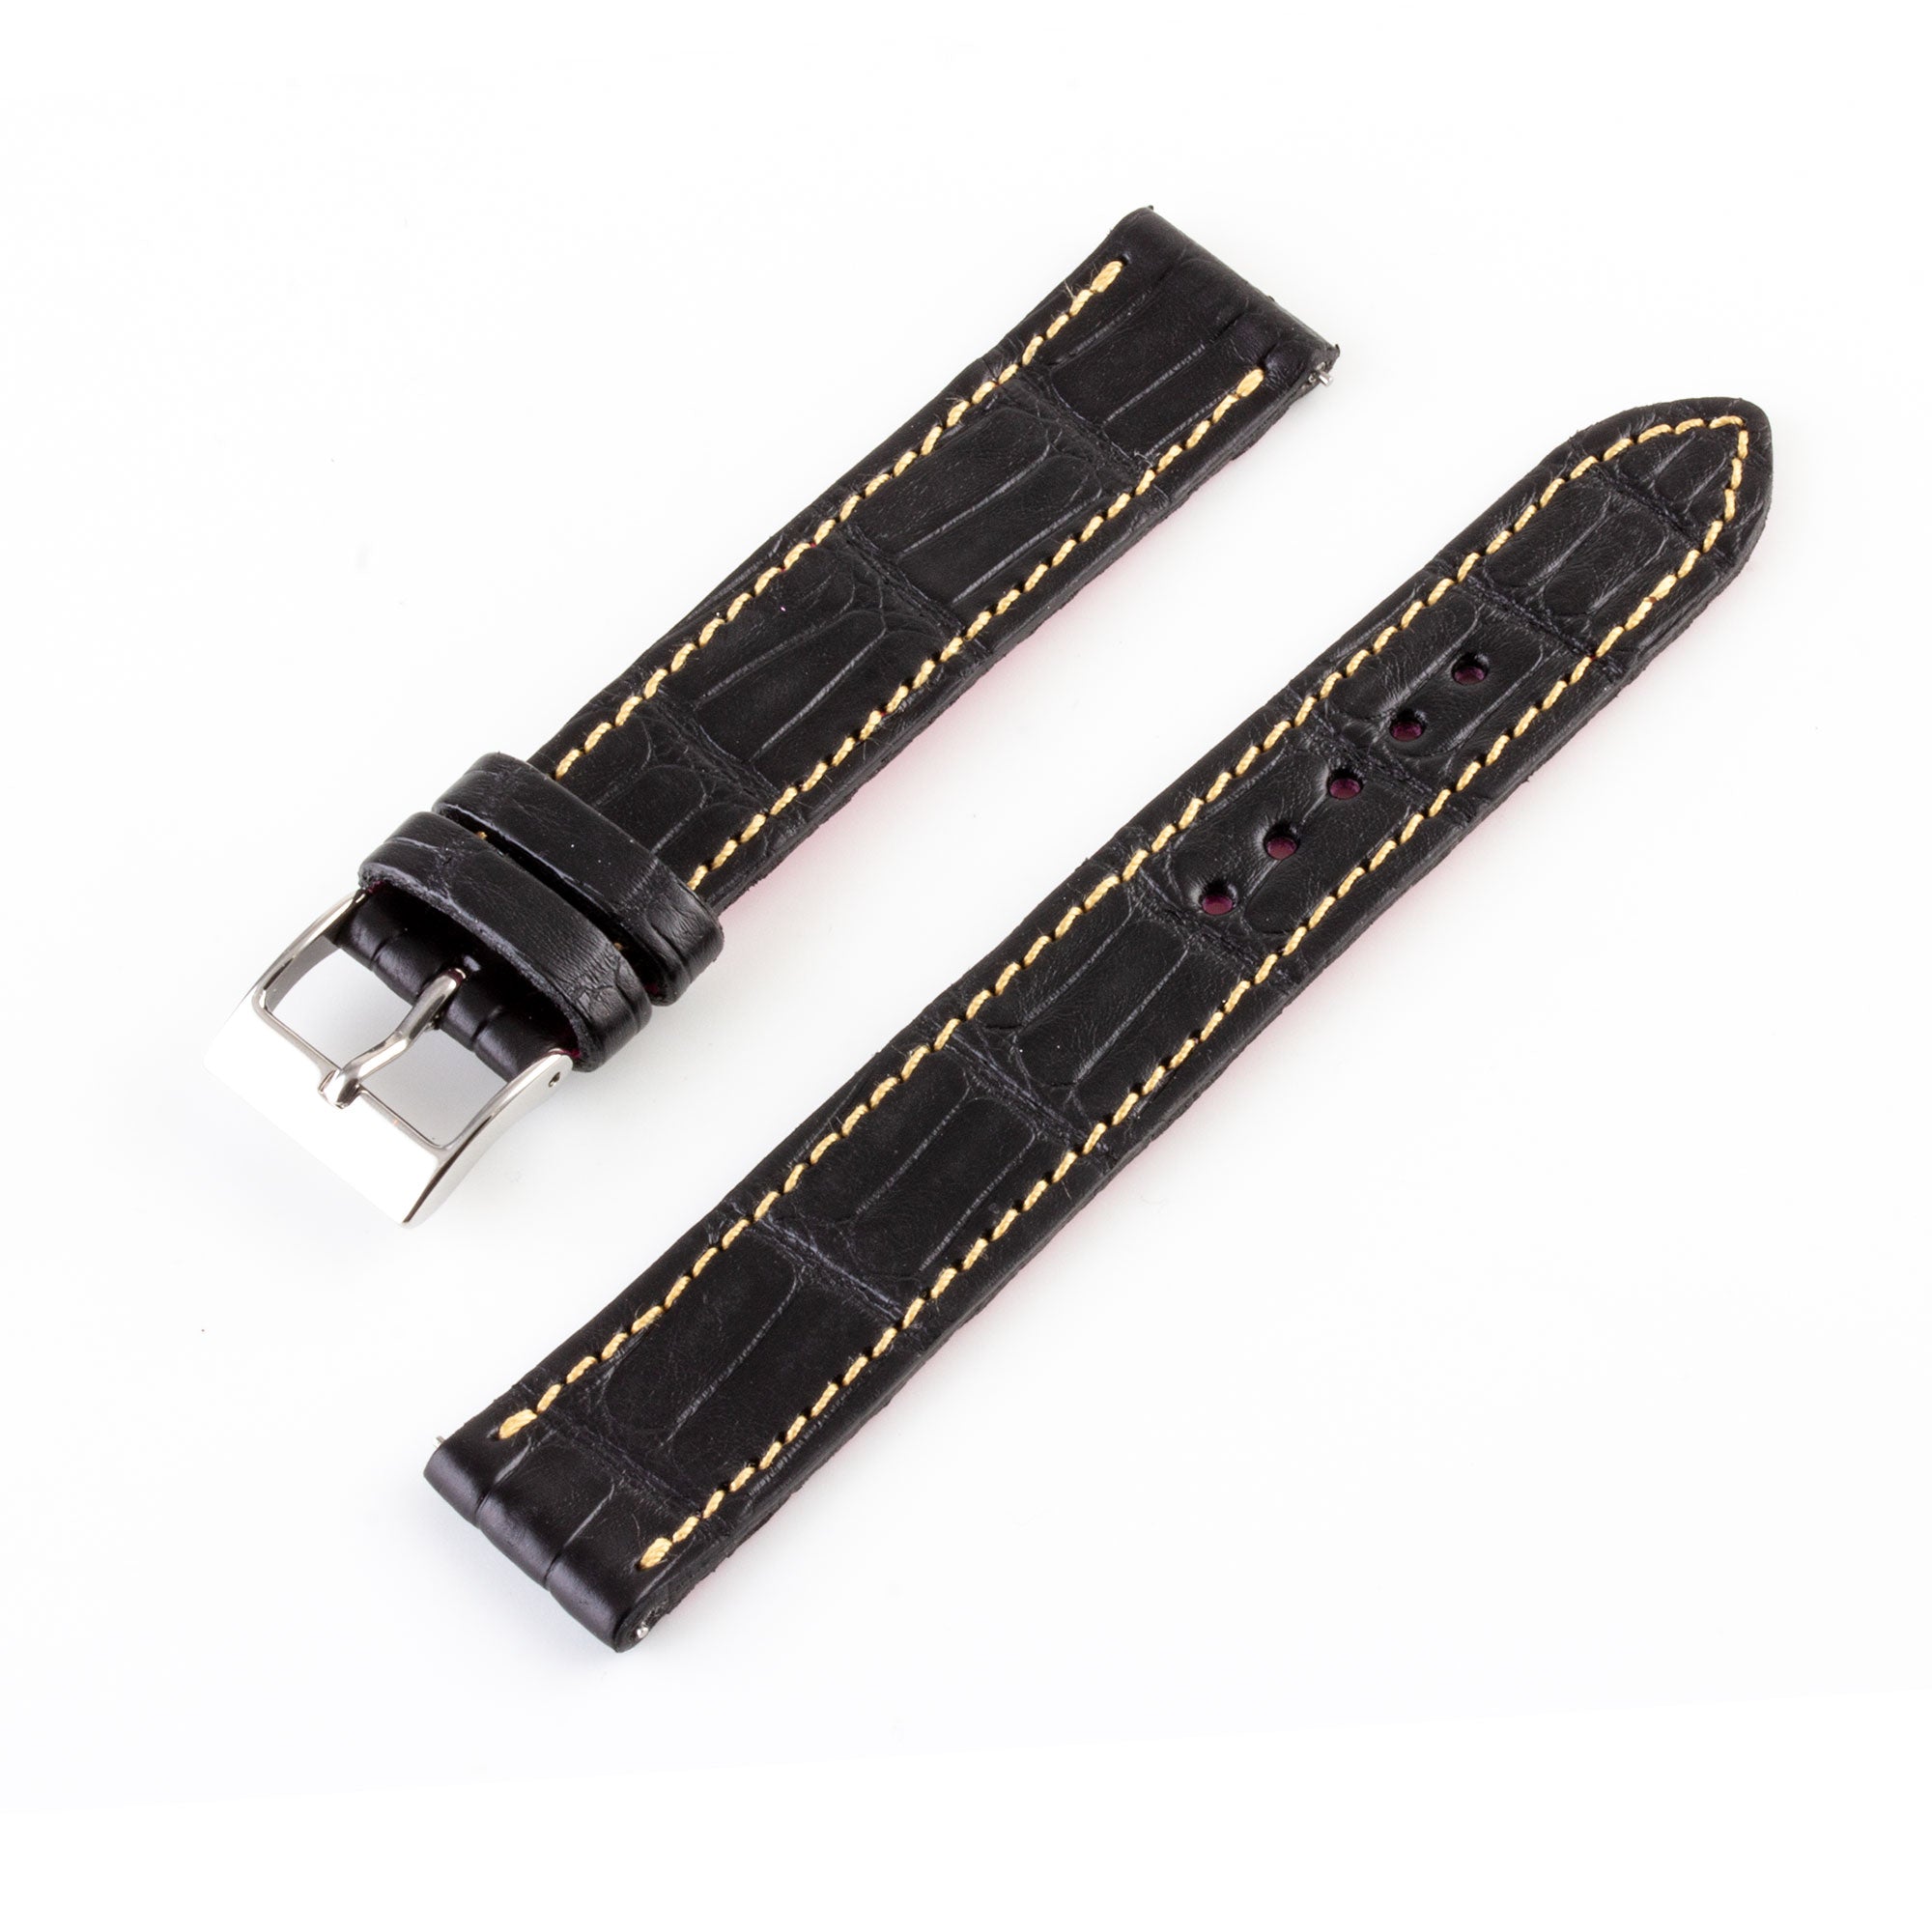 Alligator "Solo" leather watch band - 17mm width (0.67 inches) / Size M (n° 3)